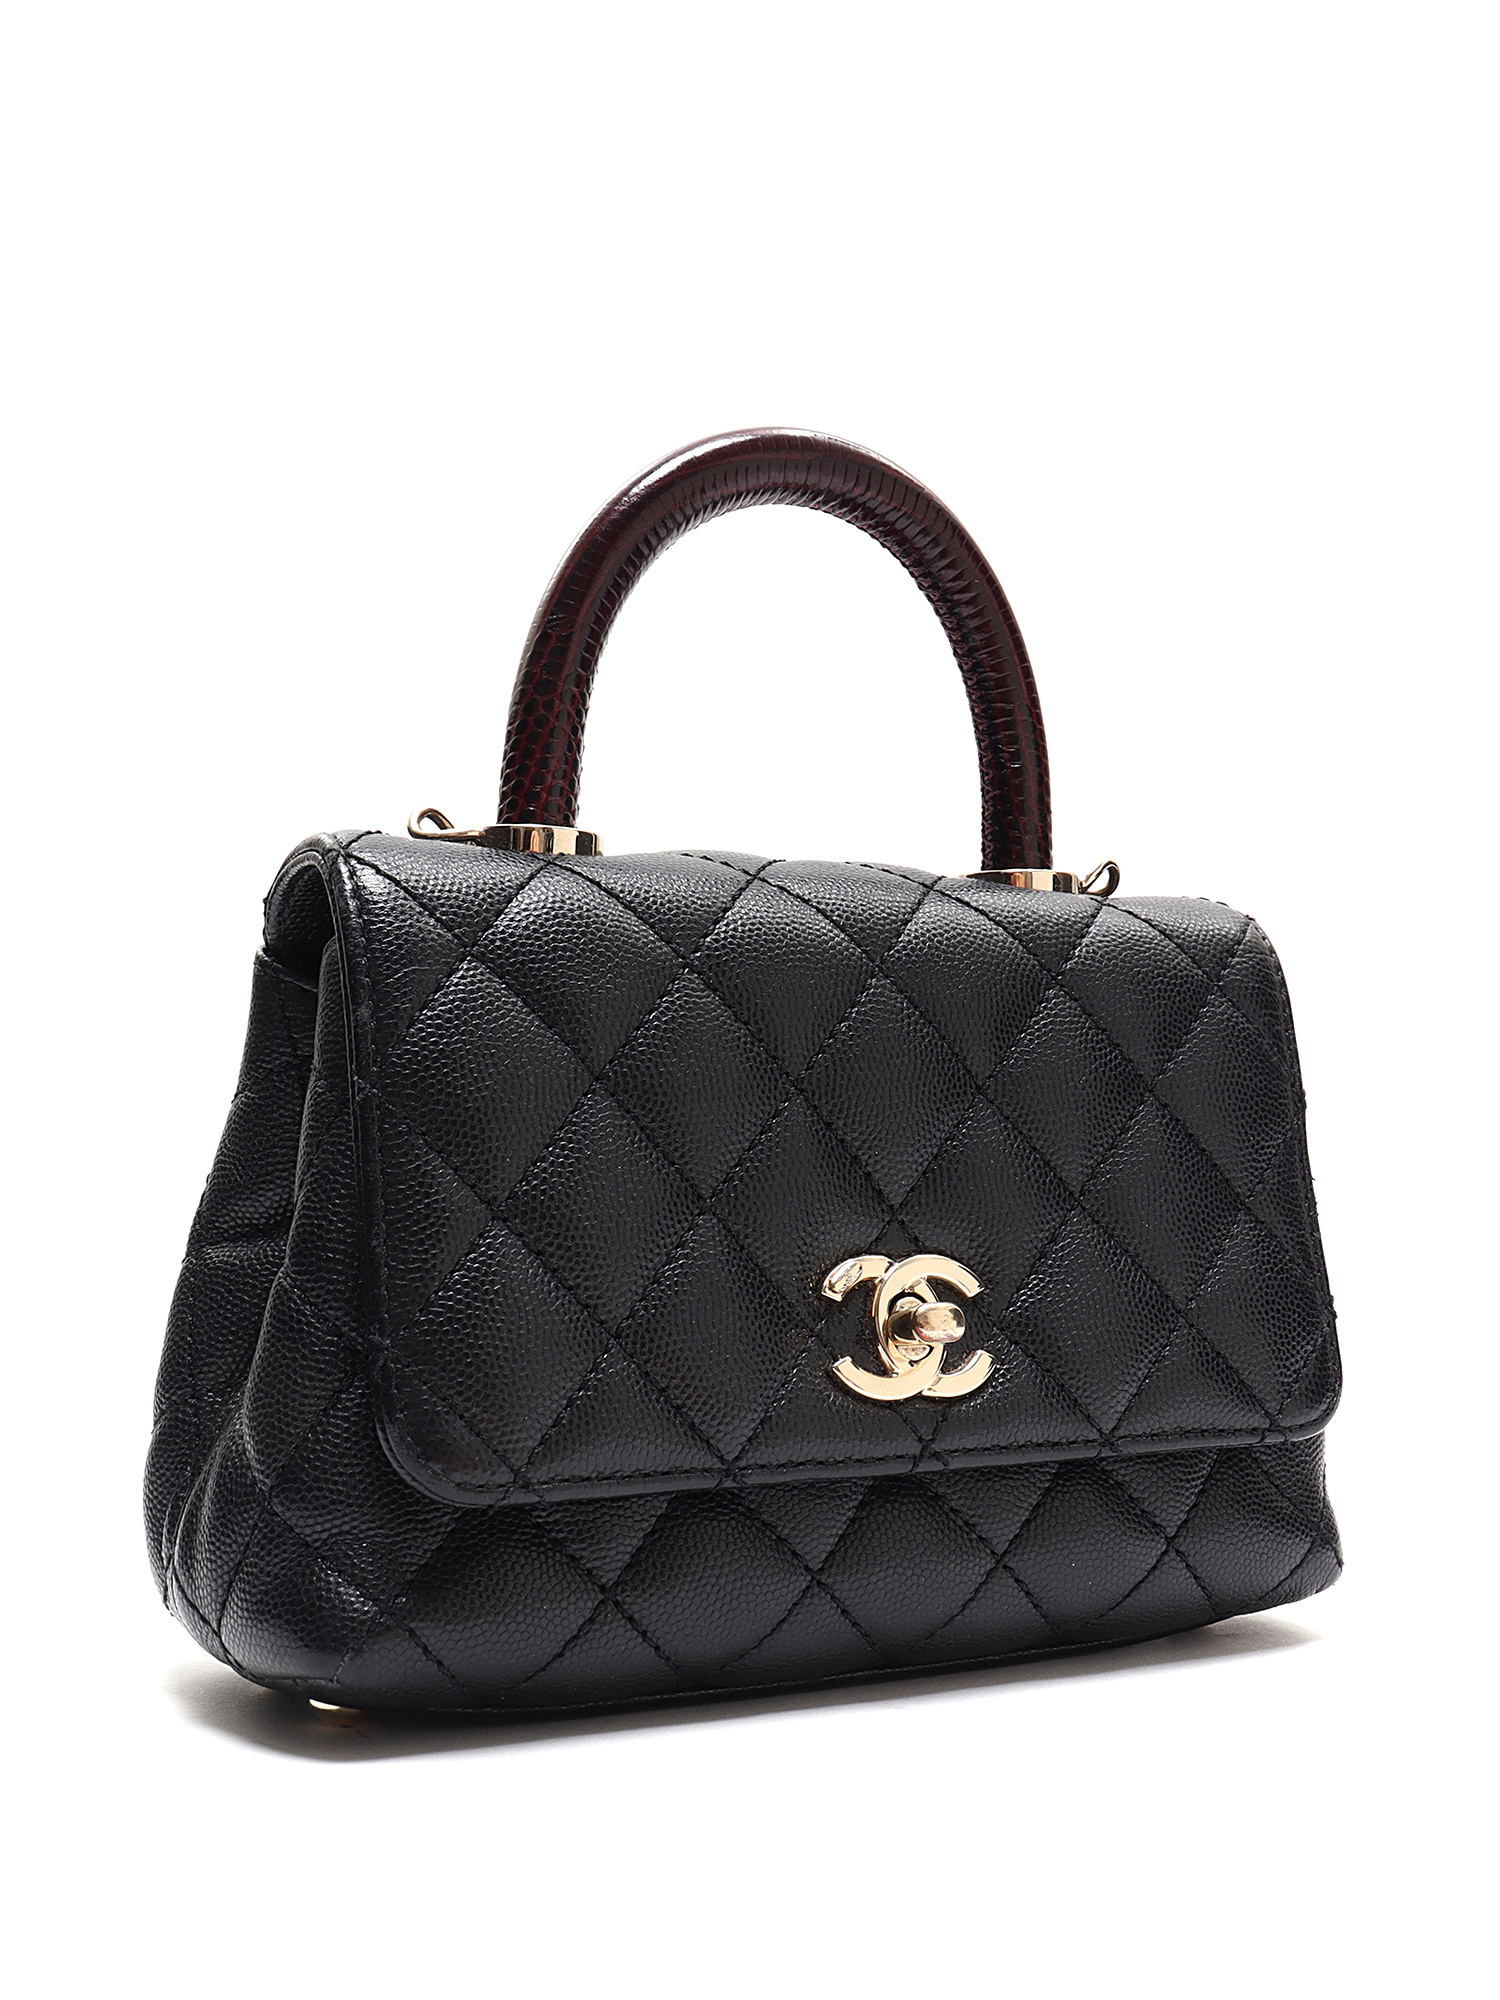 CHANEL Quilted Caviar Leather Flap Bag